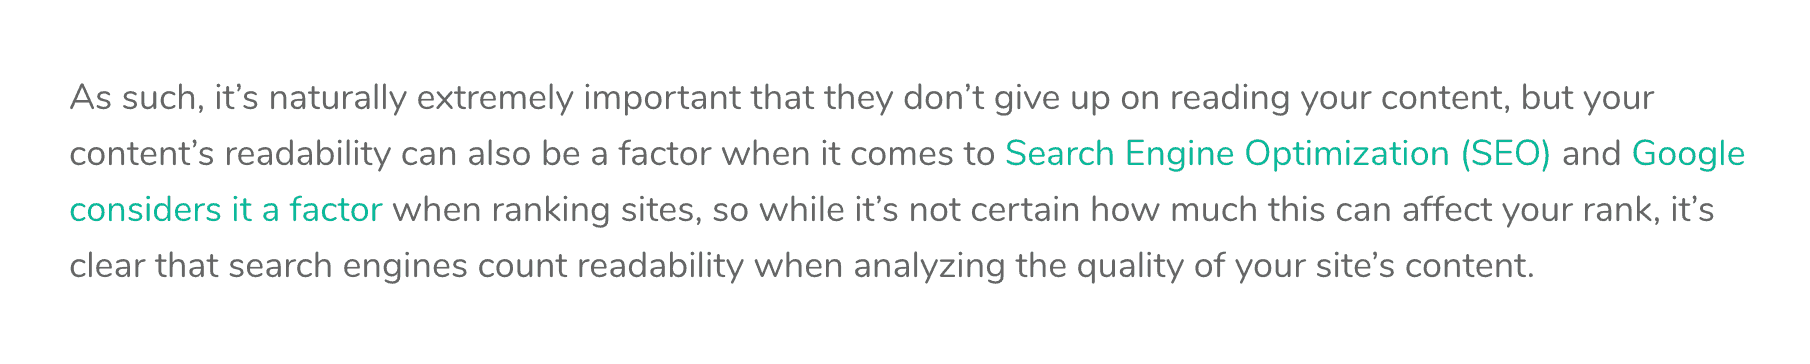 An example of a long sentence, reading "As such, it's naturally extremely important that they don't give up on reading your content, but your content's readability can also be a factor when it comes to Search Engine Optimization (SEO) and Google considers it a factor when ranking sites, so while it's not certain how much this can affect your rank, it's clear that search engines count readability when analyzing the quality of your site's content."